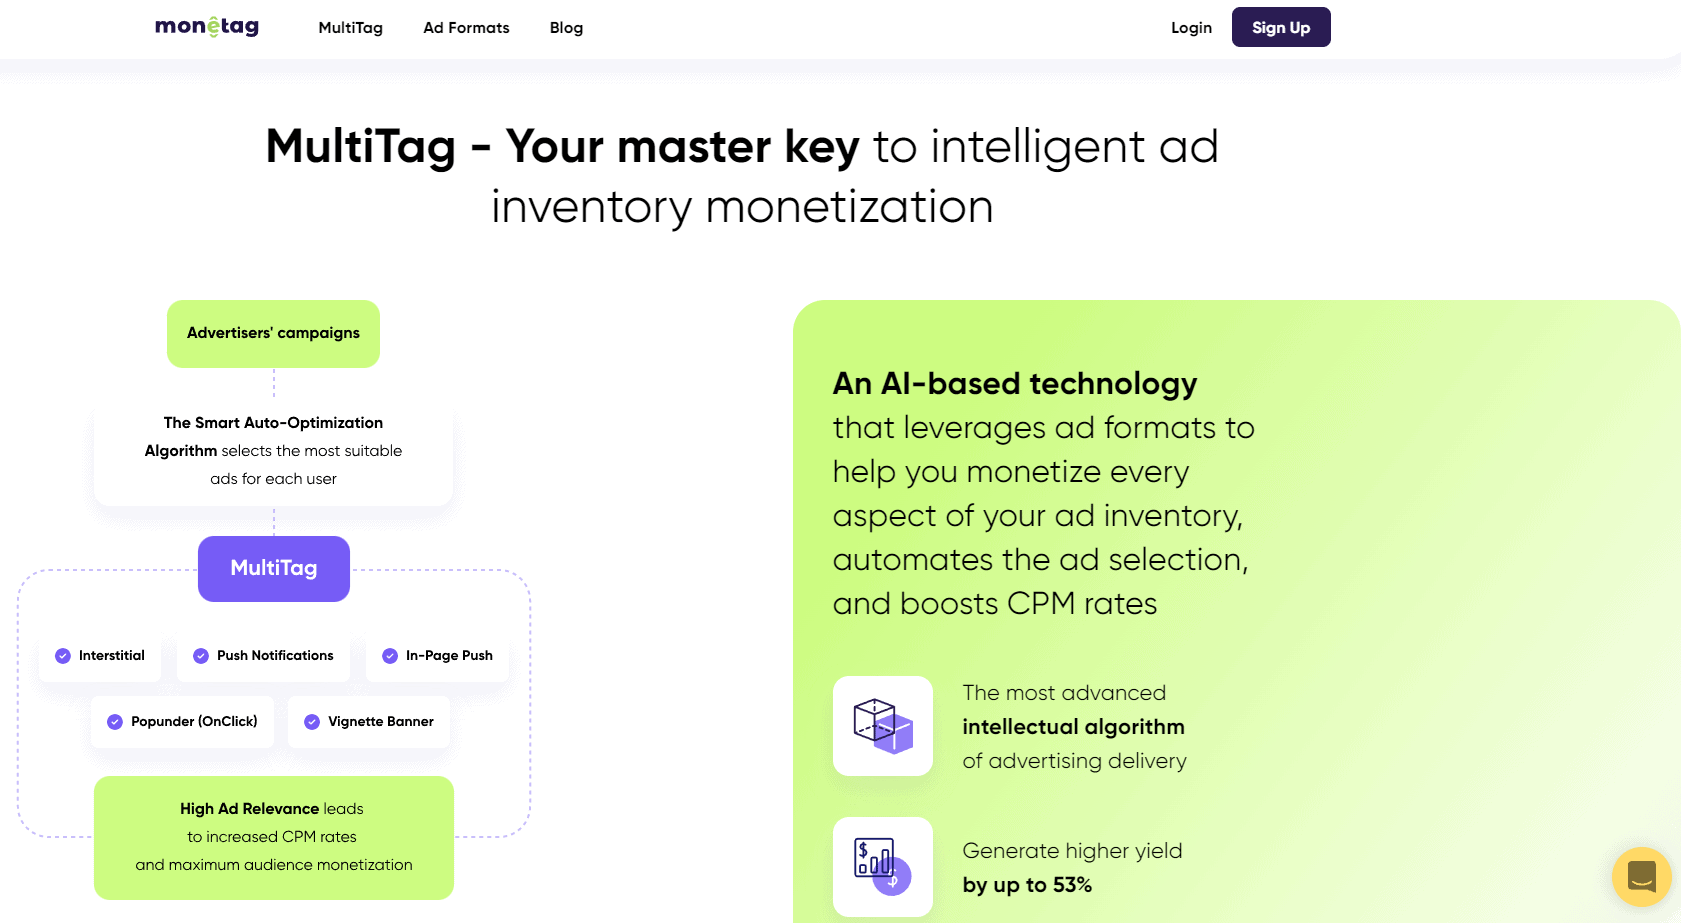 Overview of MultiTag